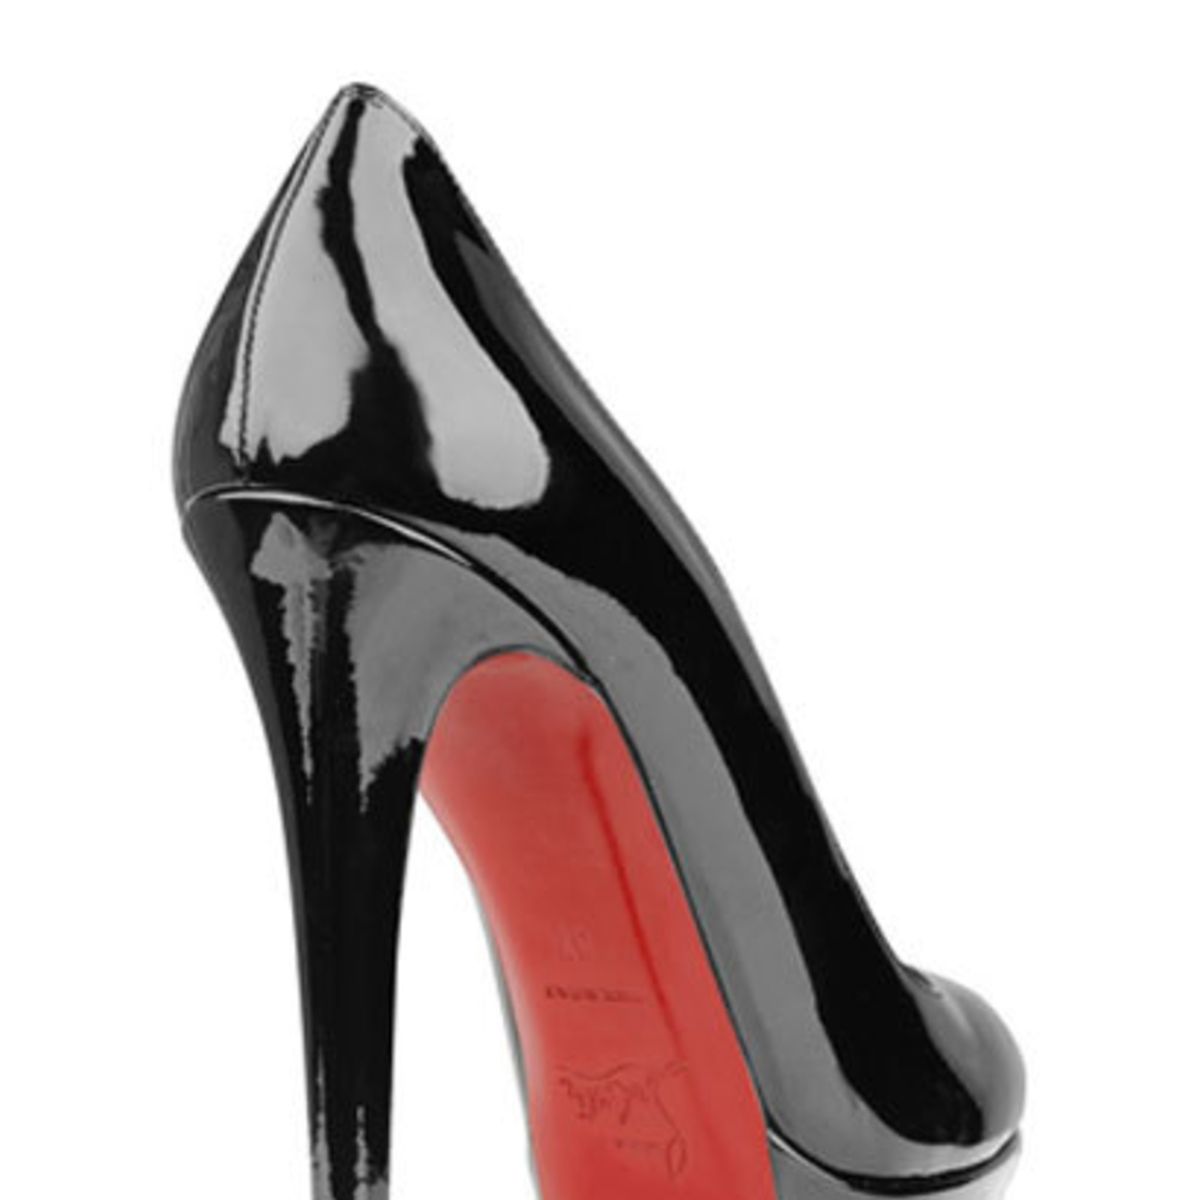 Christian Louboutin has won legal support for his trademarked red soles